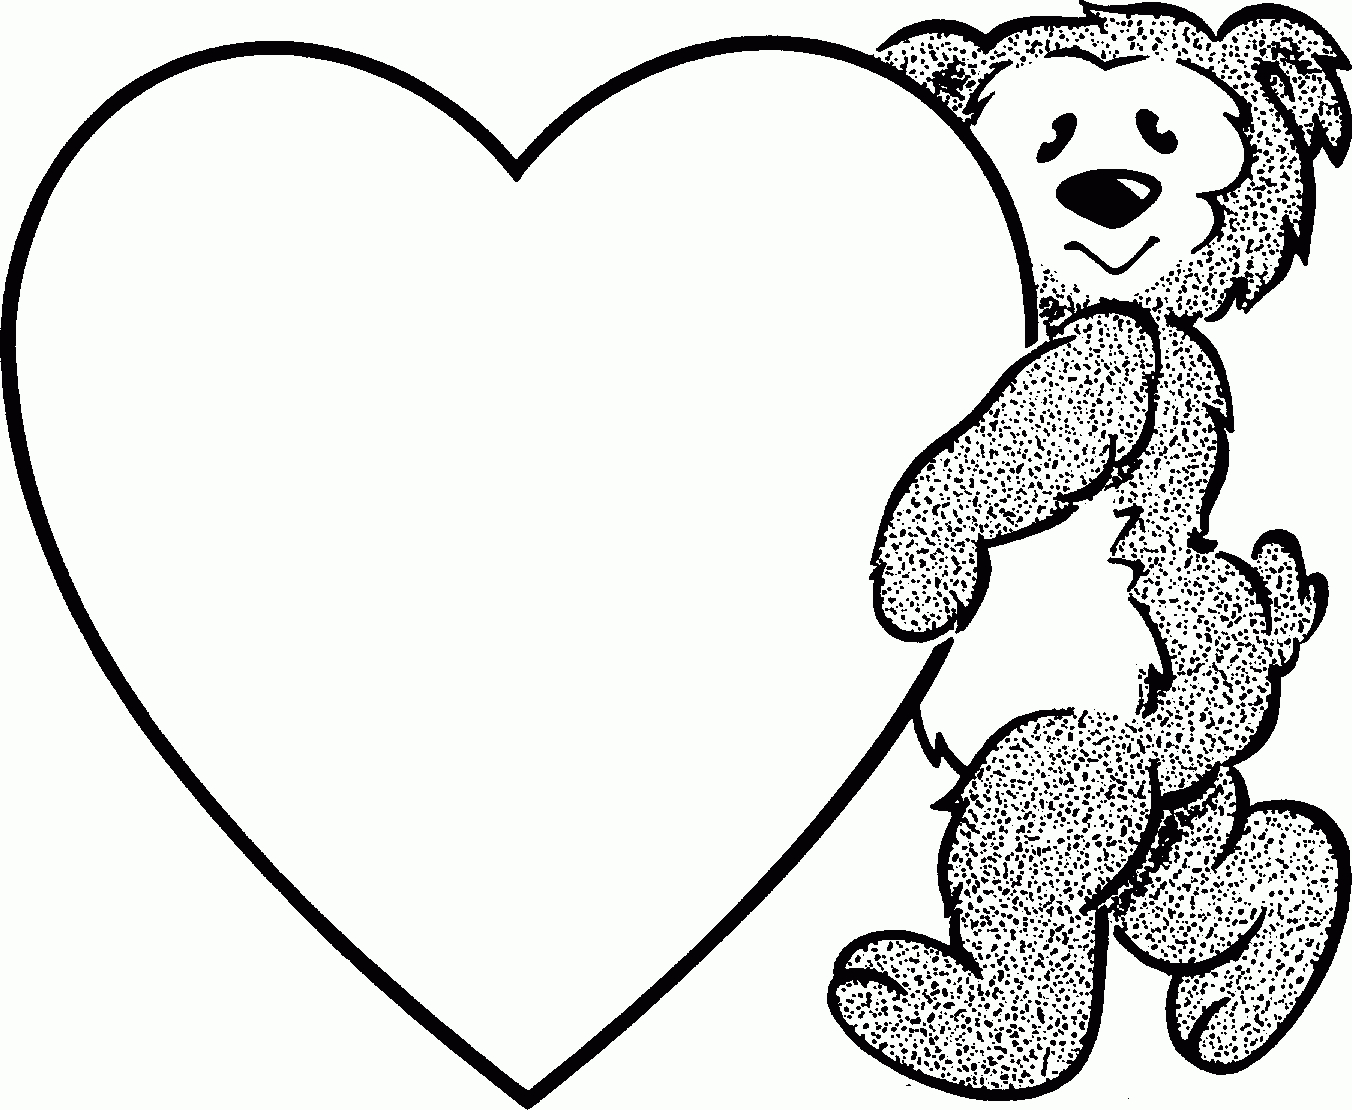 Free Printable Valentine Coloring Pages For Kids | Decorations - Free Printable Heart Coloring Pages